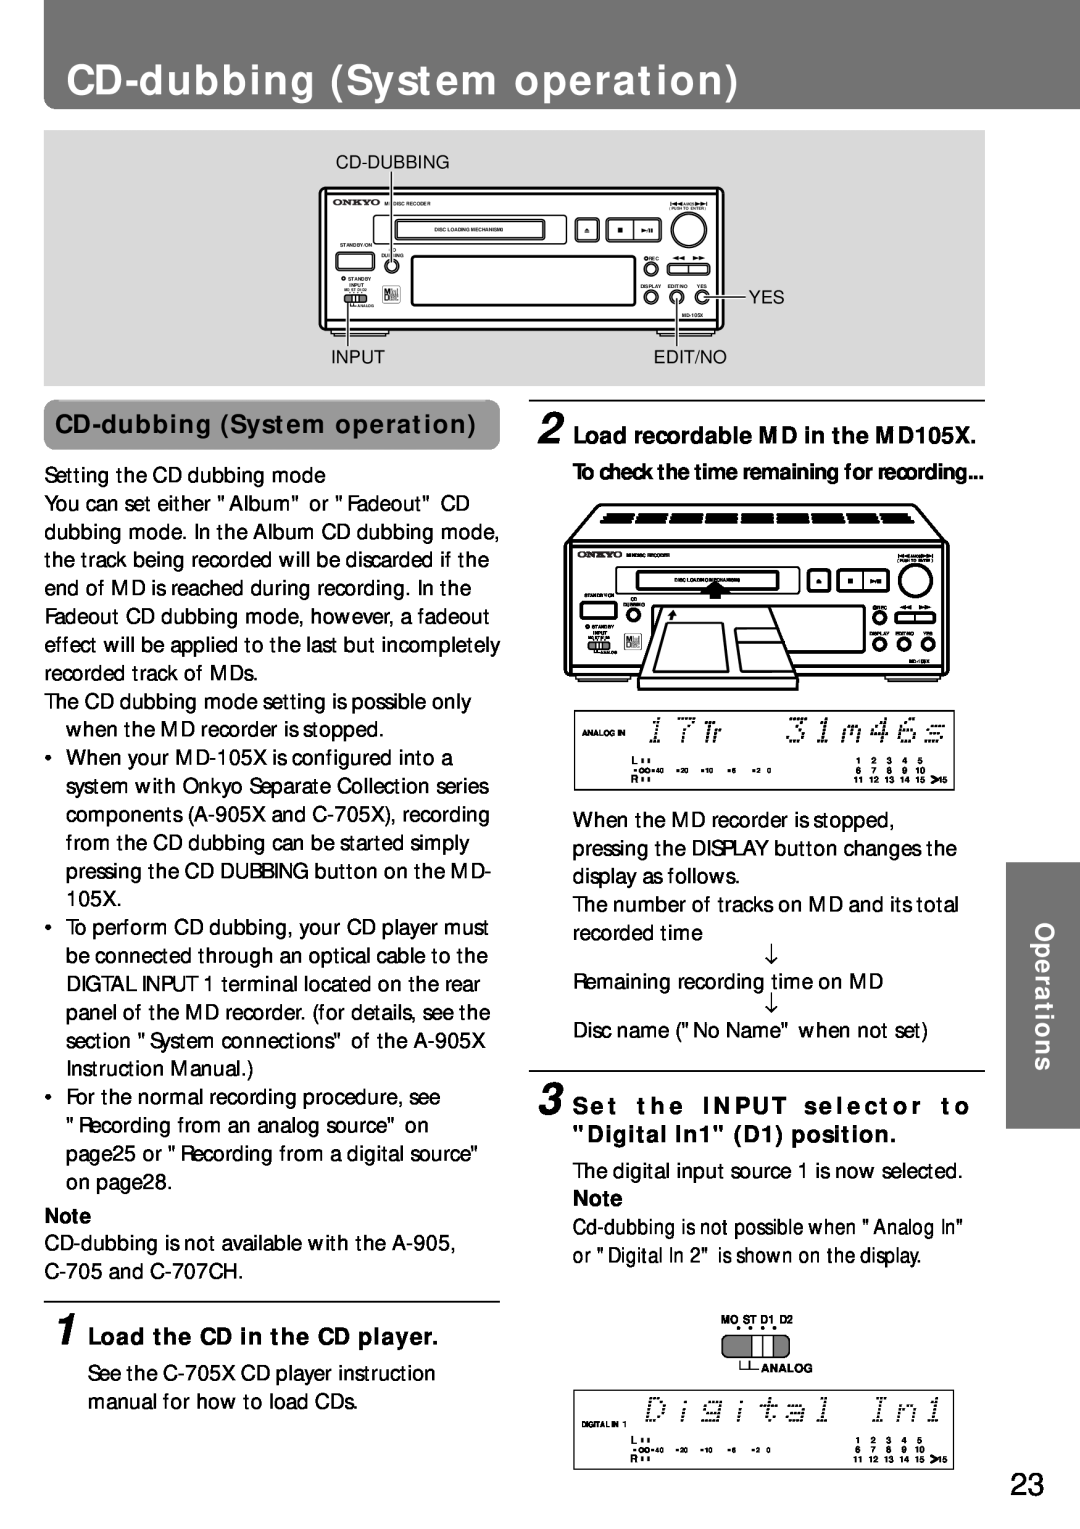 Onkyo MD-105X manual CD-dubbingSystem operation, Load recordable MD in the MD105X, Load the CD in the CD player, Operations 